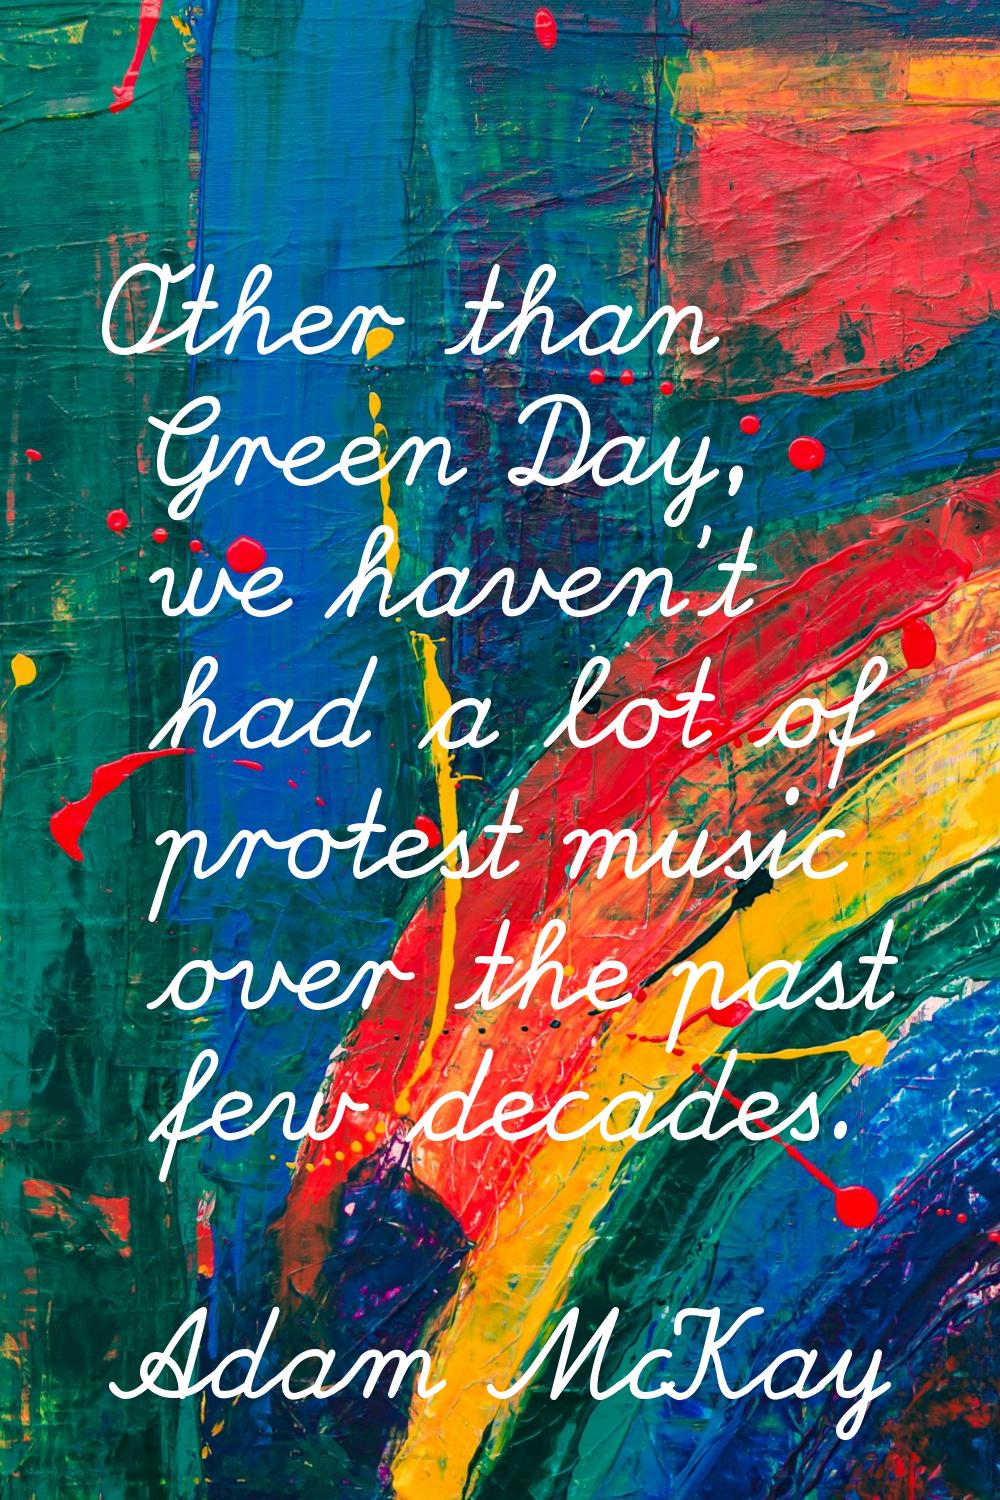 Other than Green Day, we haven't had a lot of protest music over the past few decades.